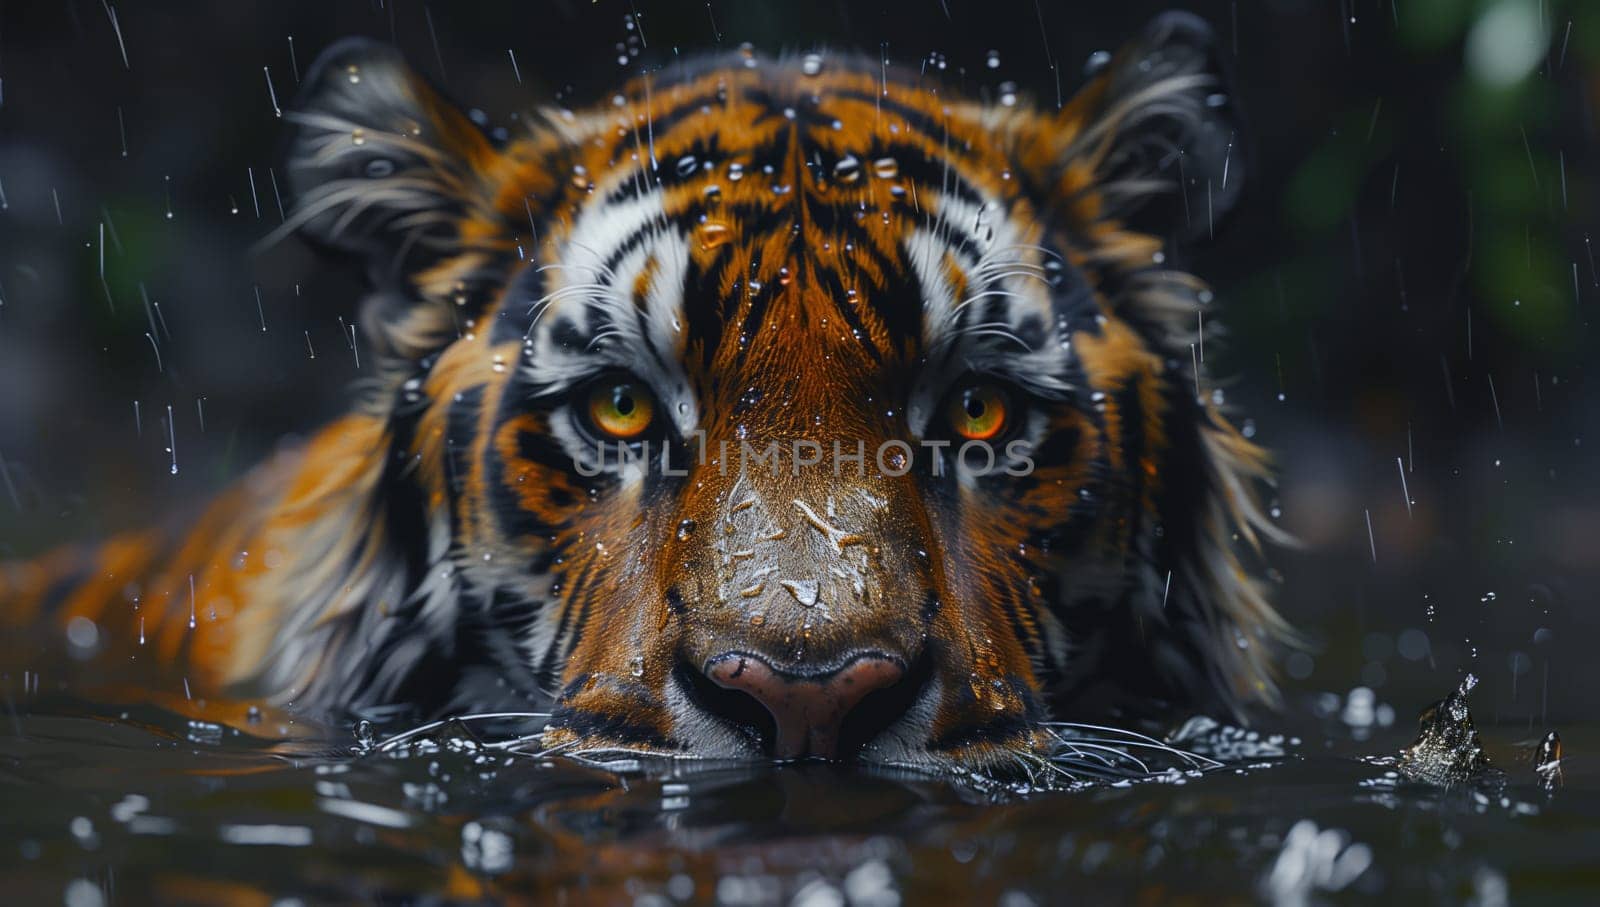 A Bengal tiger is elegantly swimming in the water, its whiskers glistening as it gazes into the camera, showcasing the beauty of this majestic Felidae species in its natural habitat